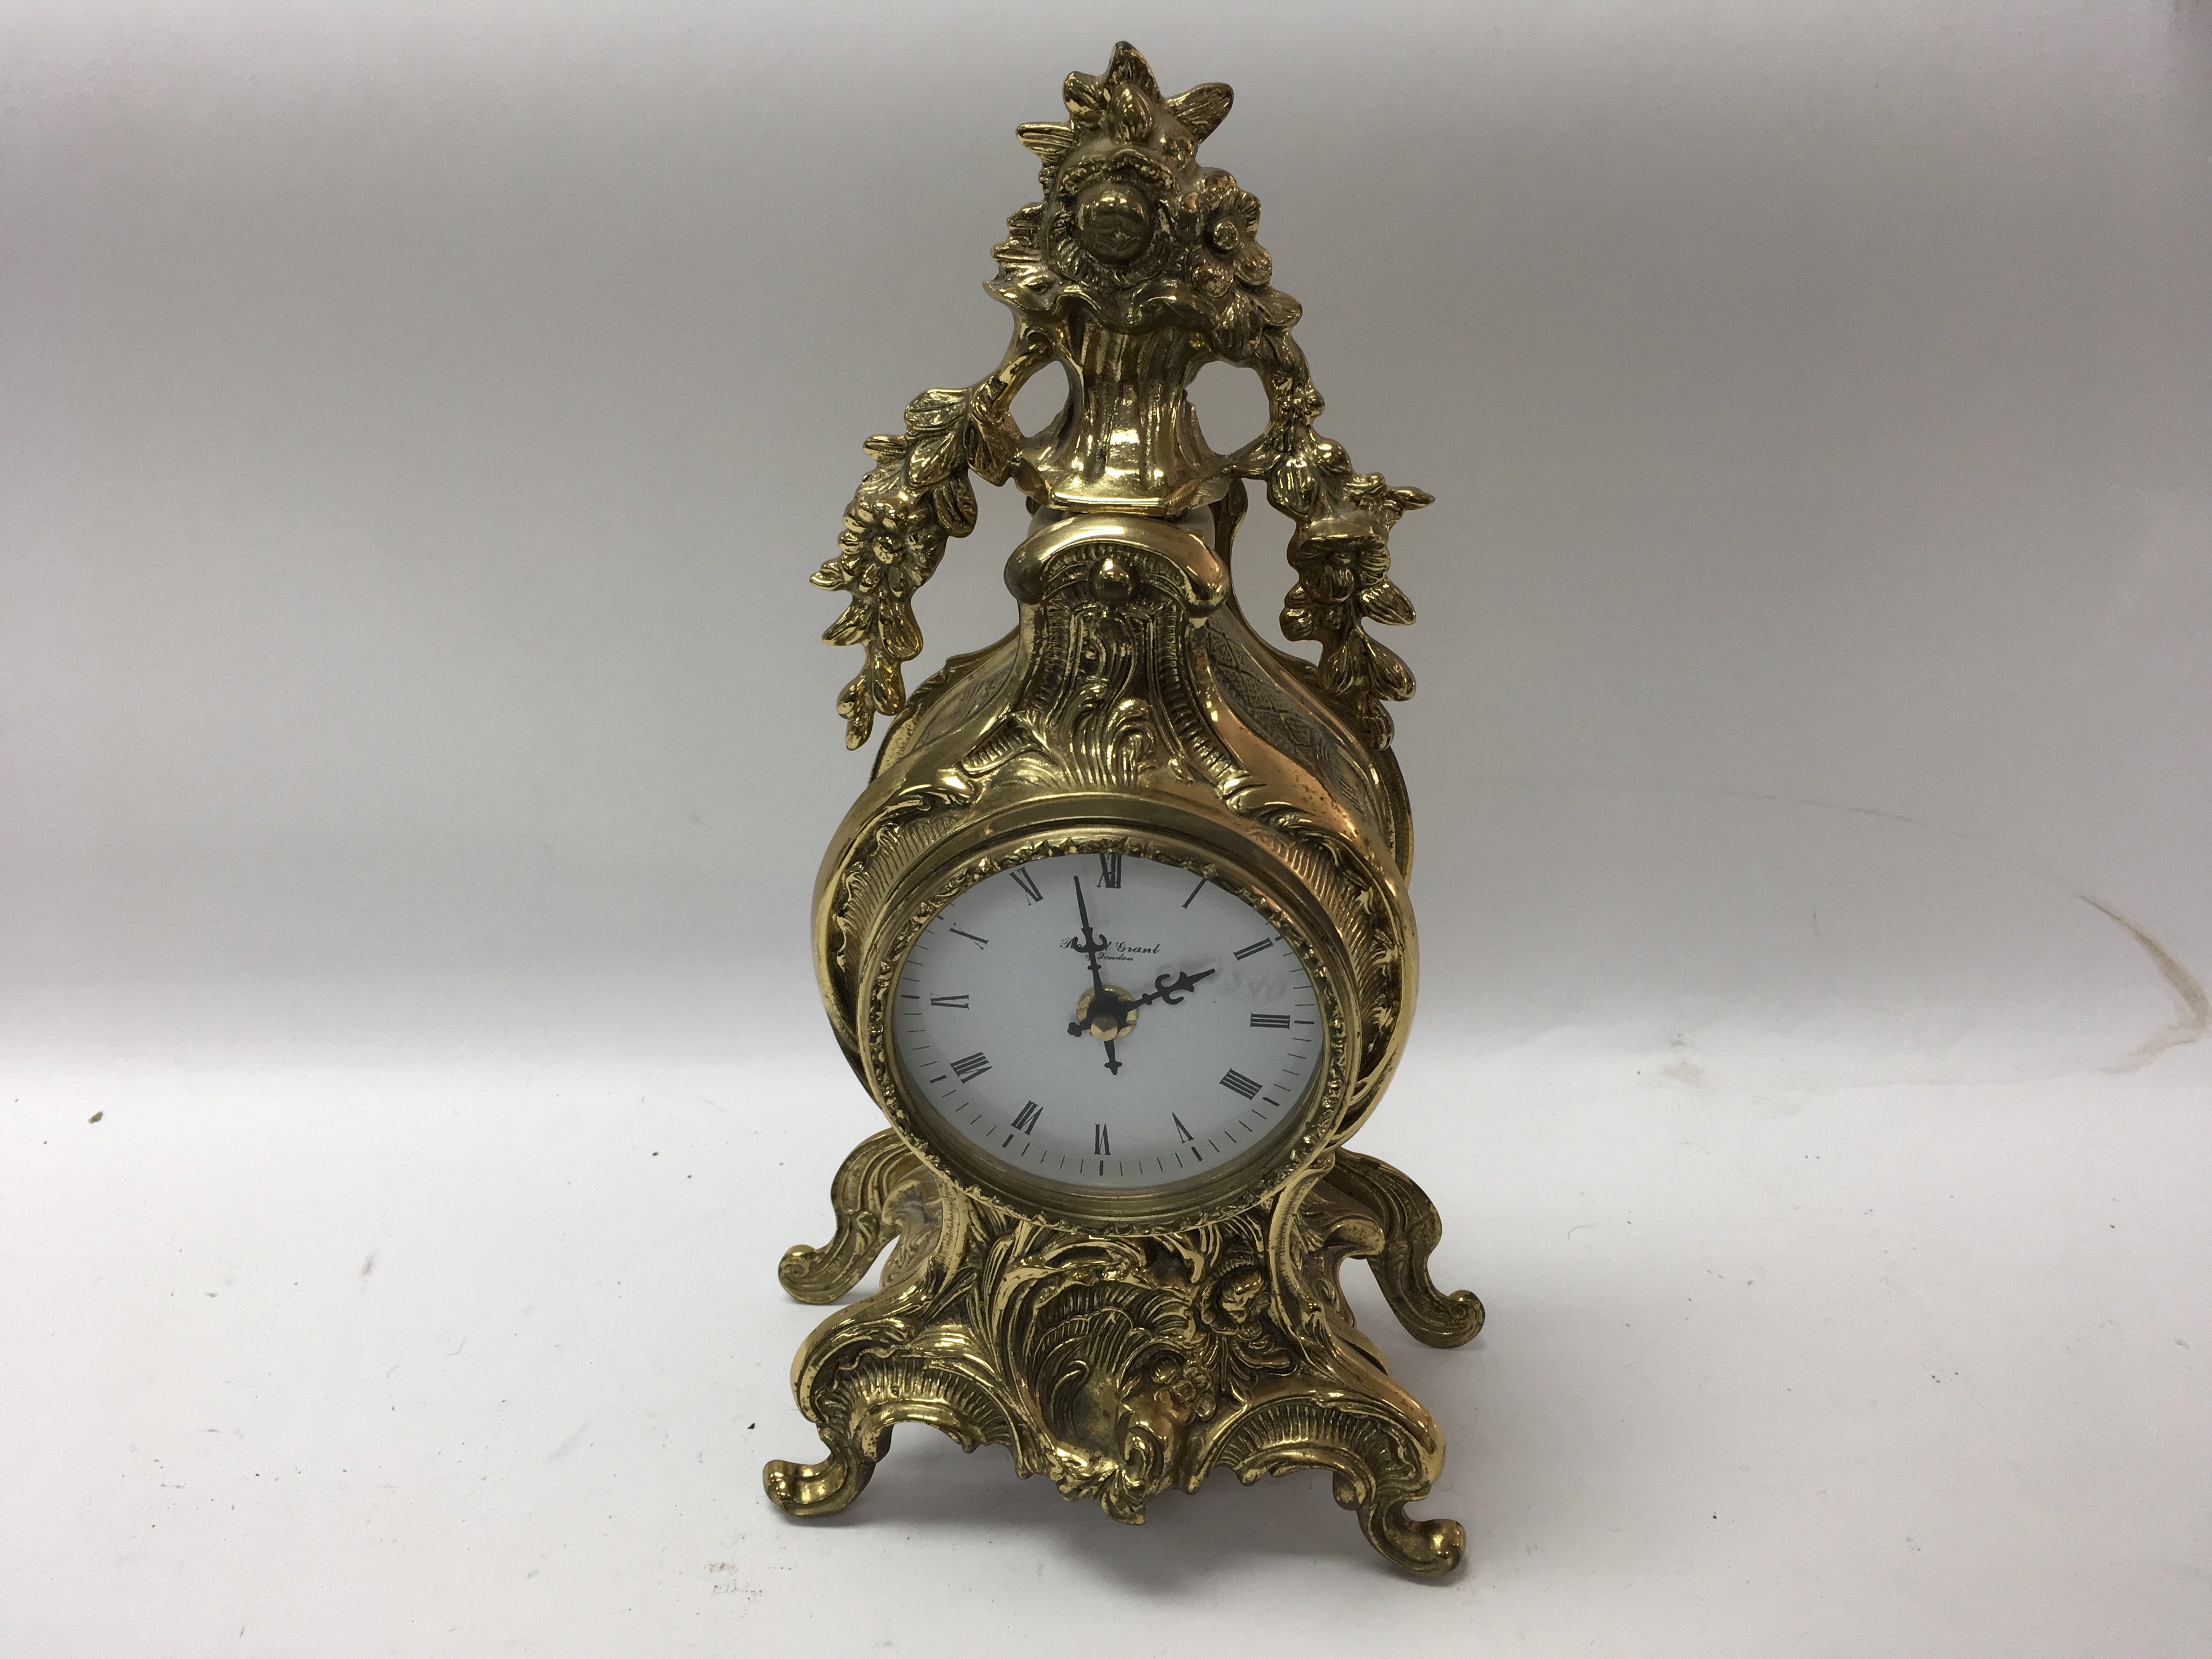 A 20th century brass mantle clock by Robert Grant